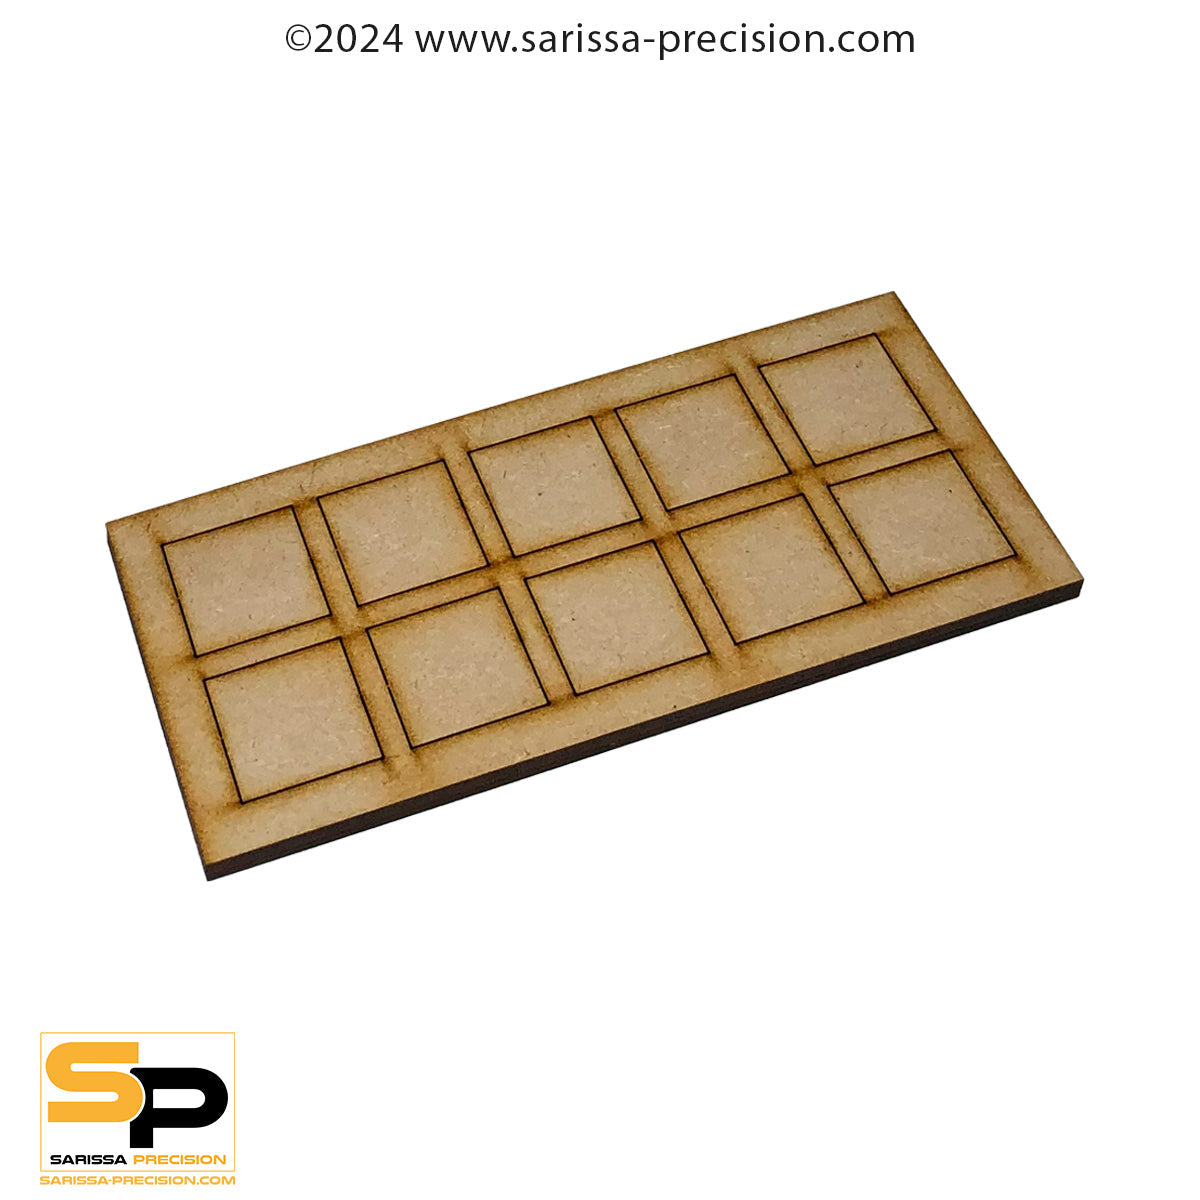 4x1 30x30mm Conversion Tray for 25x25mm bases